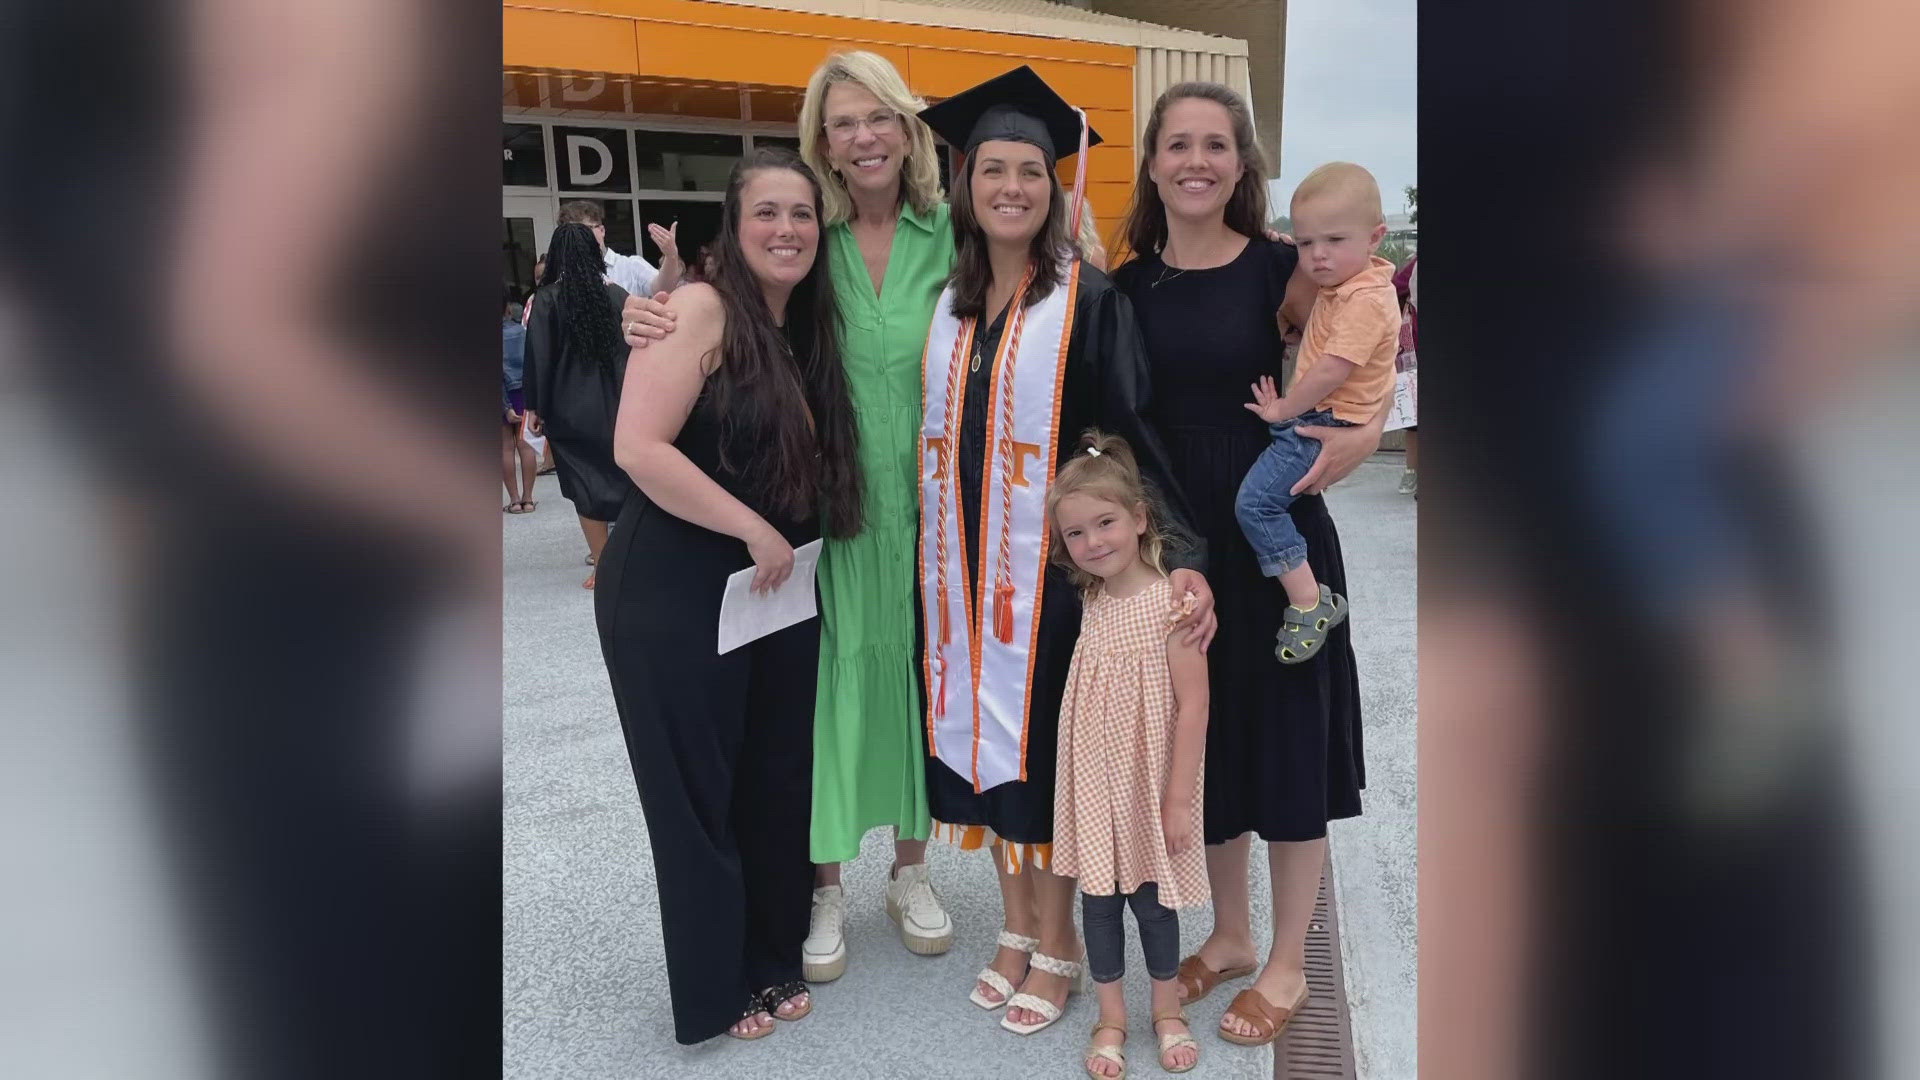 Elizabeth Gooch said she struggled with addiction for around a decade, and never thought she would graduate from UT. On Friday, she claimed her degree.